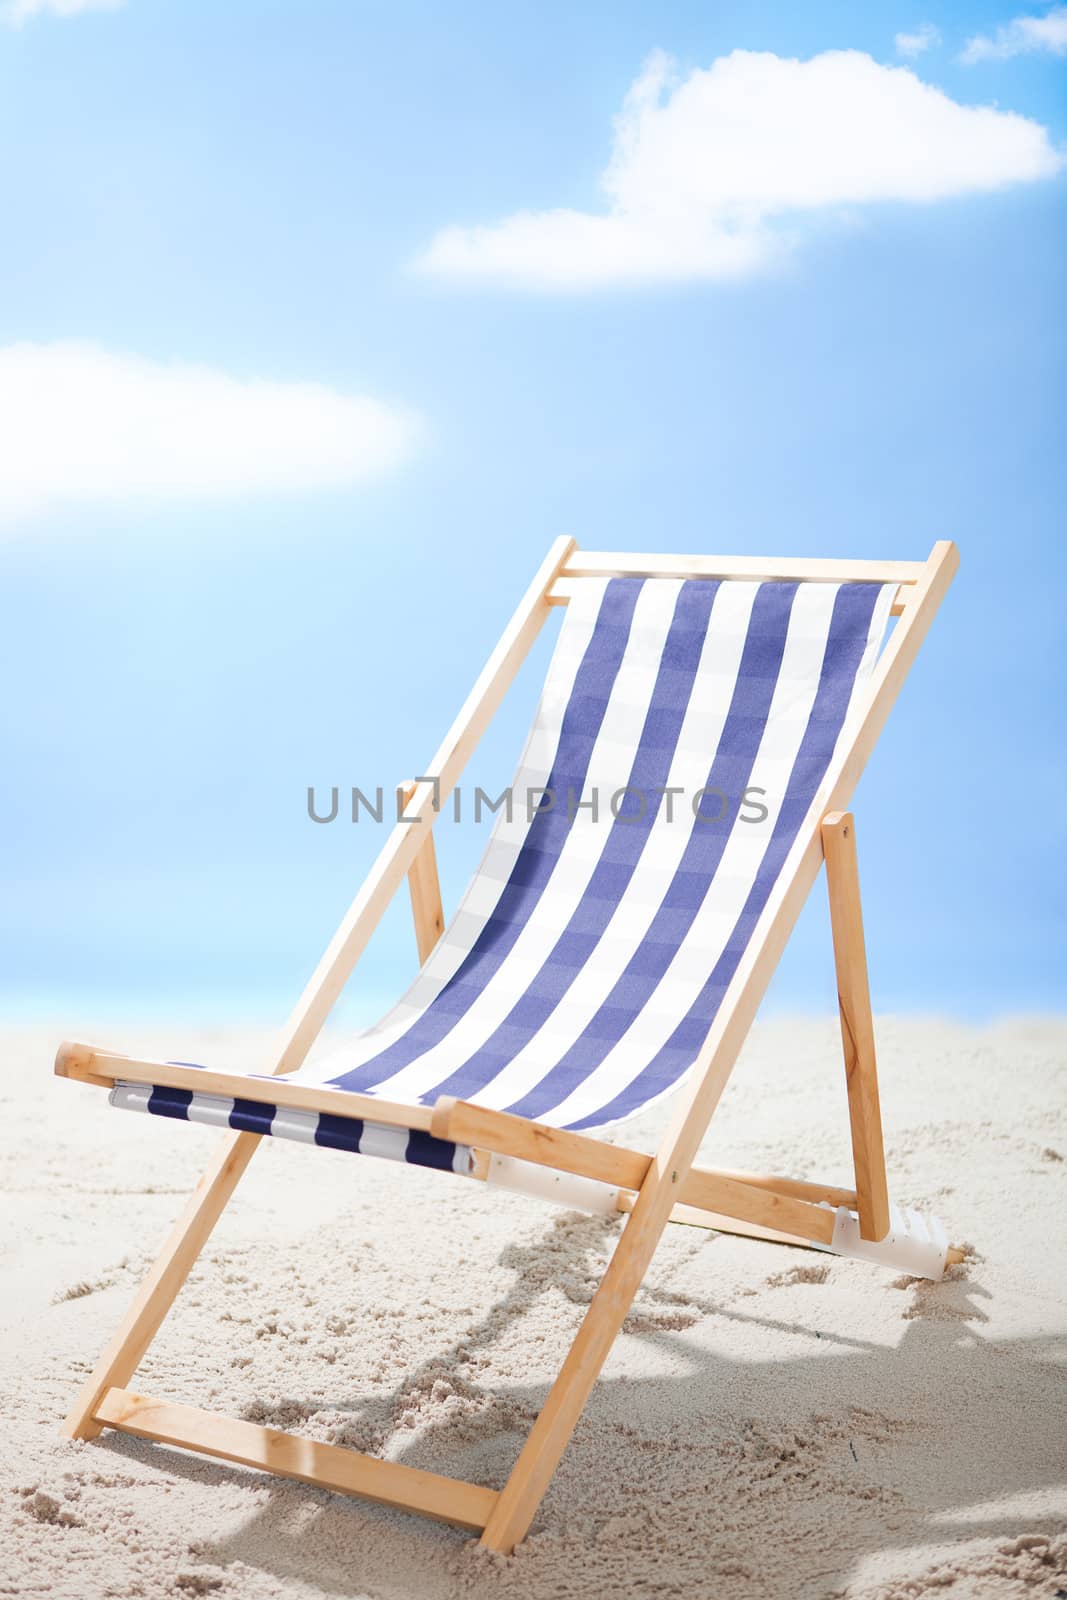 Deckchair standing at the sunny beach by AndreyPopov